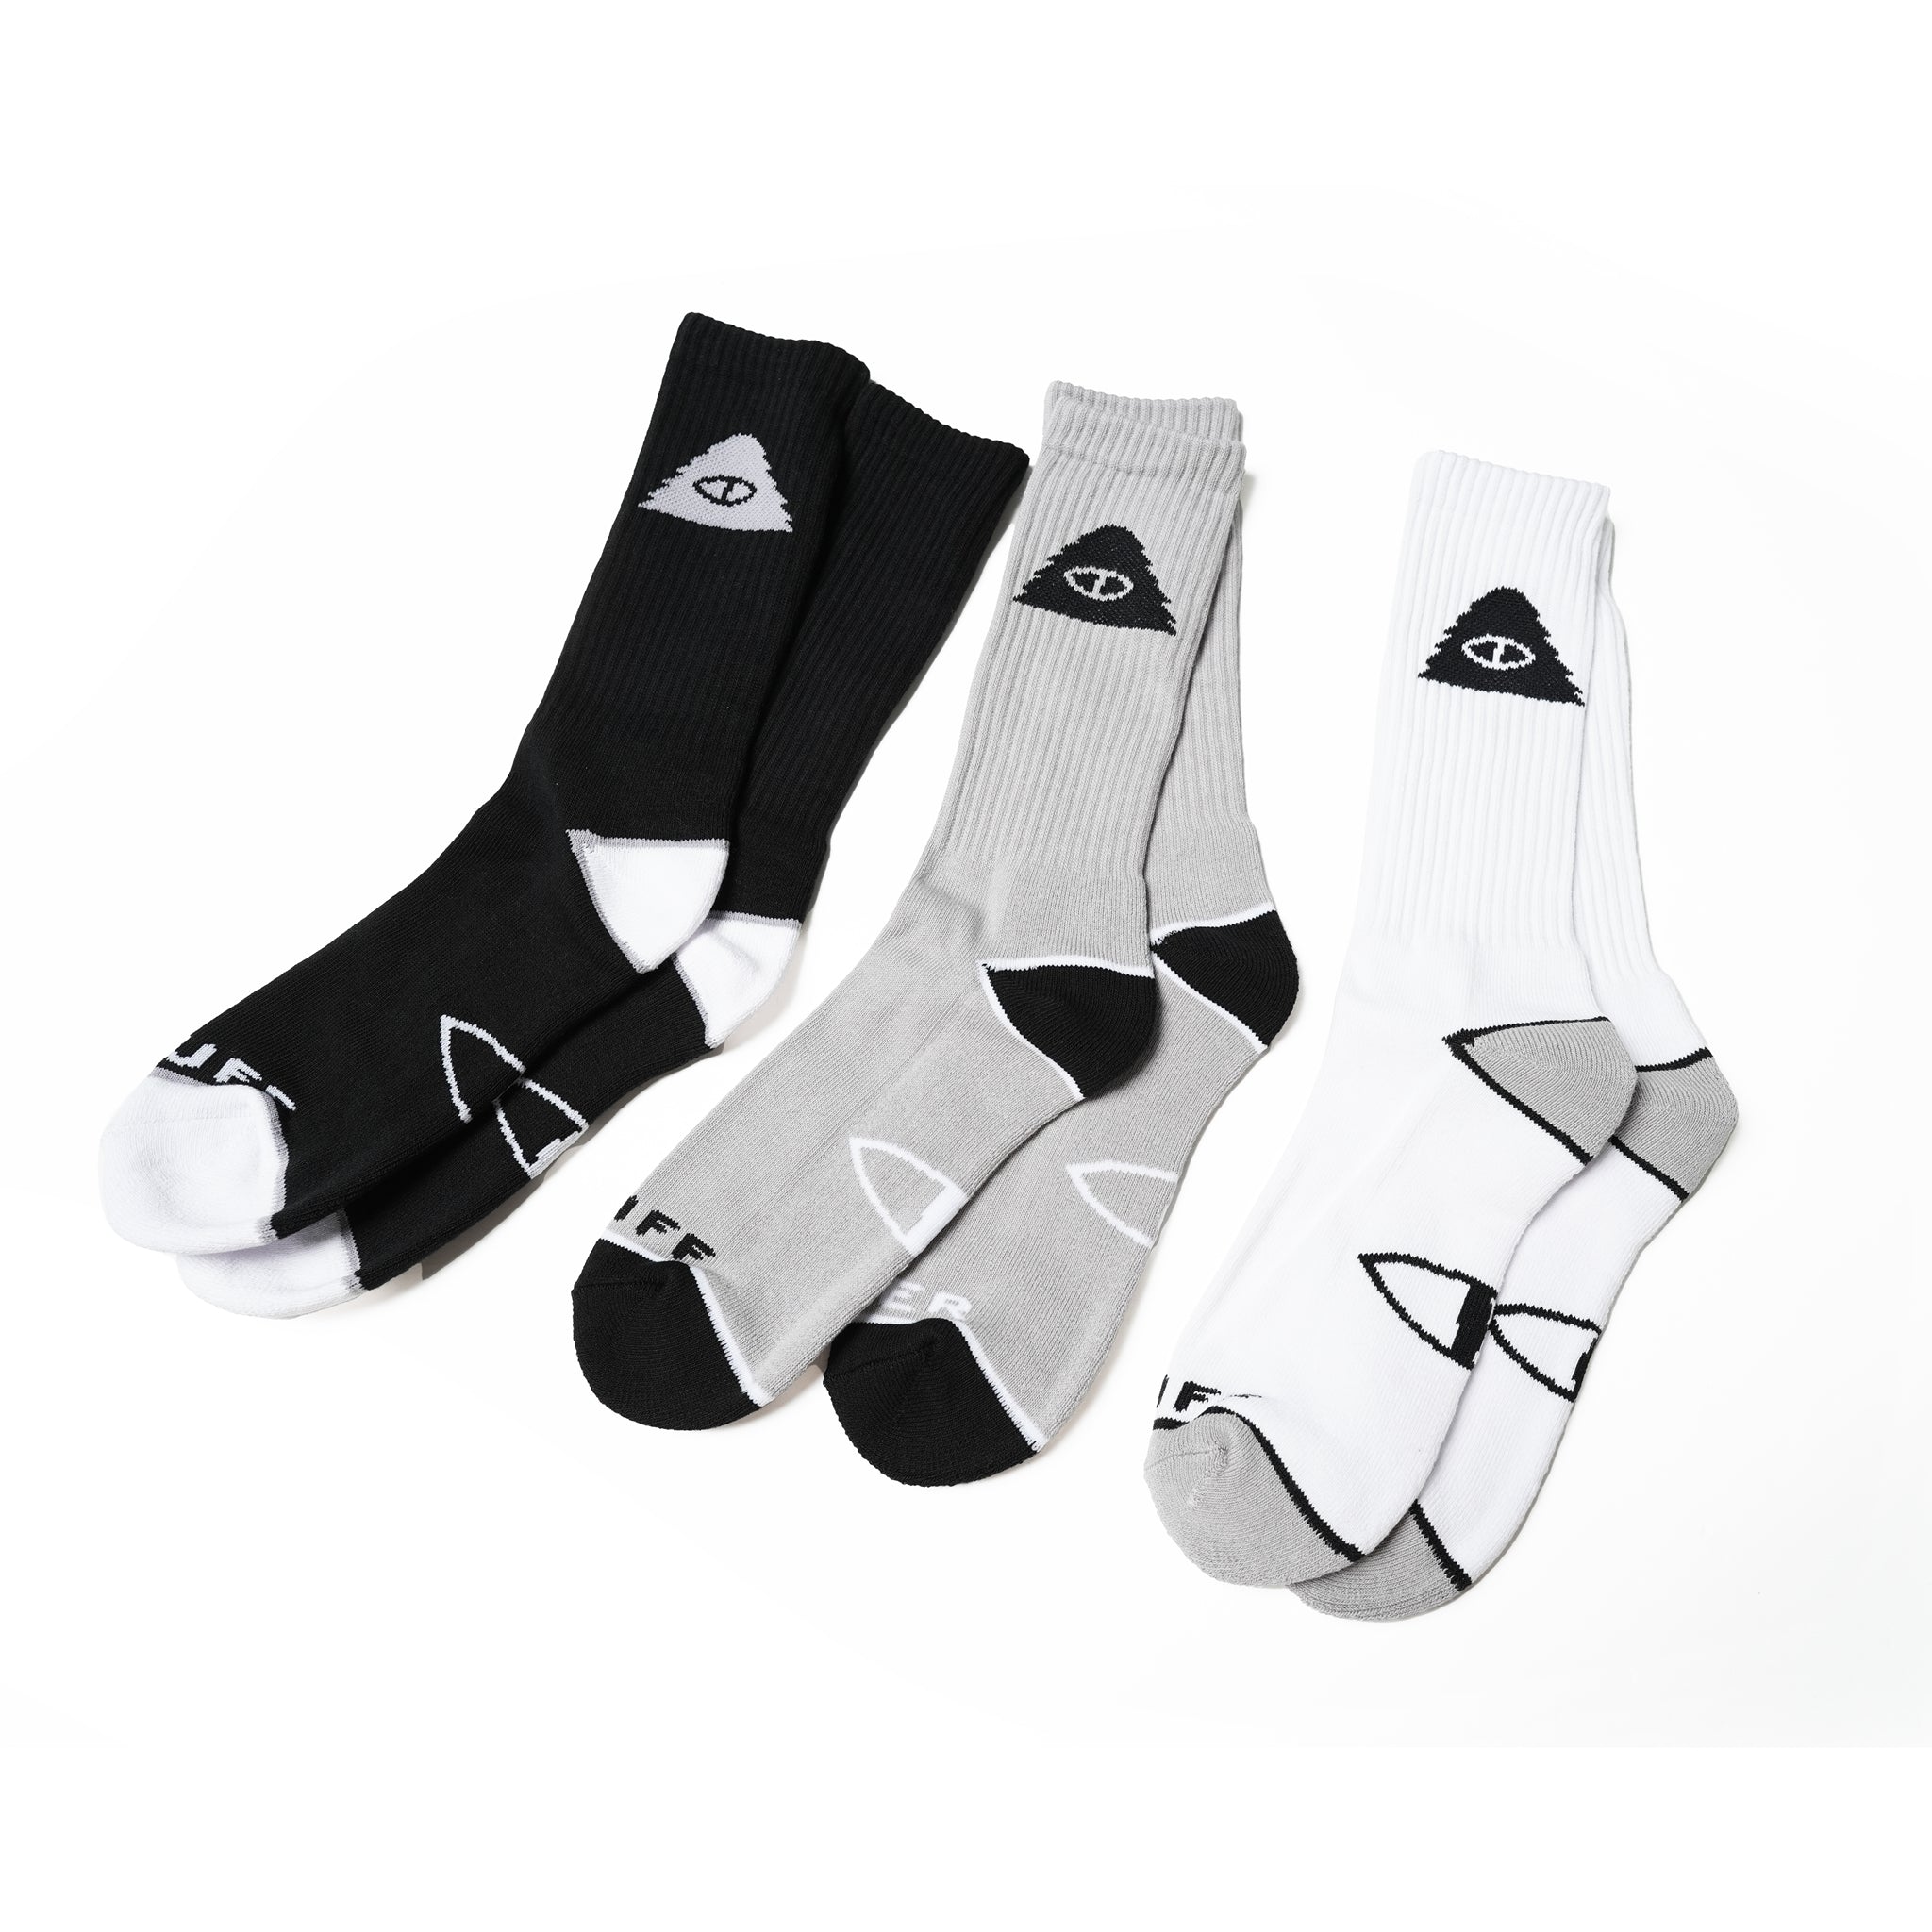 No:T00ACUSK01 | Name:ICON SOCK 3-PACK | Color:Basics【POLER_ポーラー】